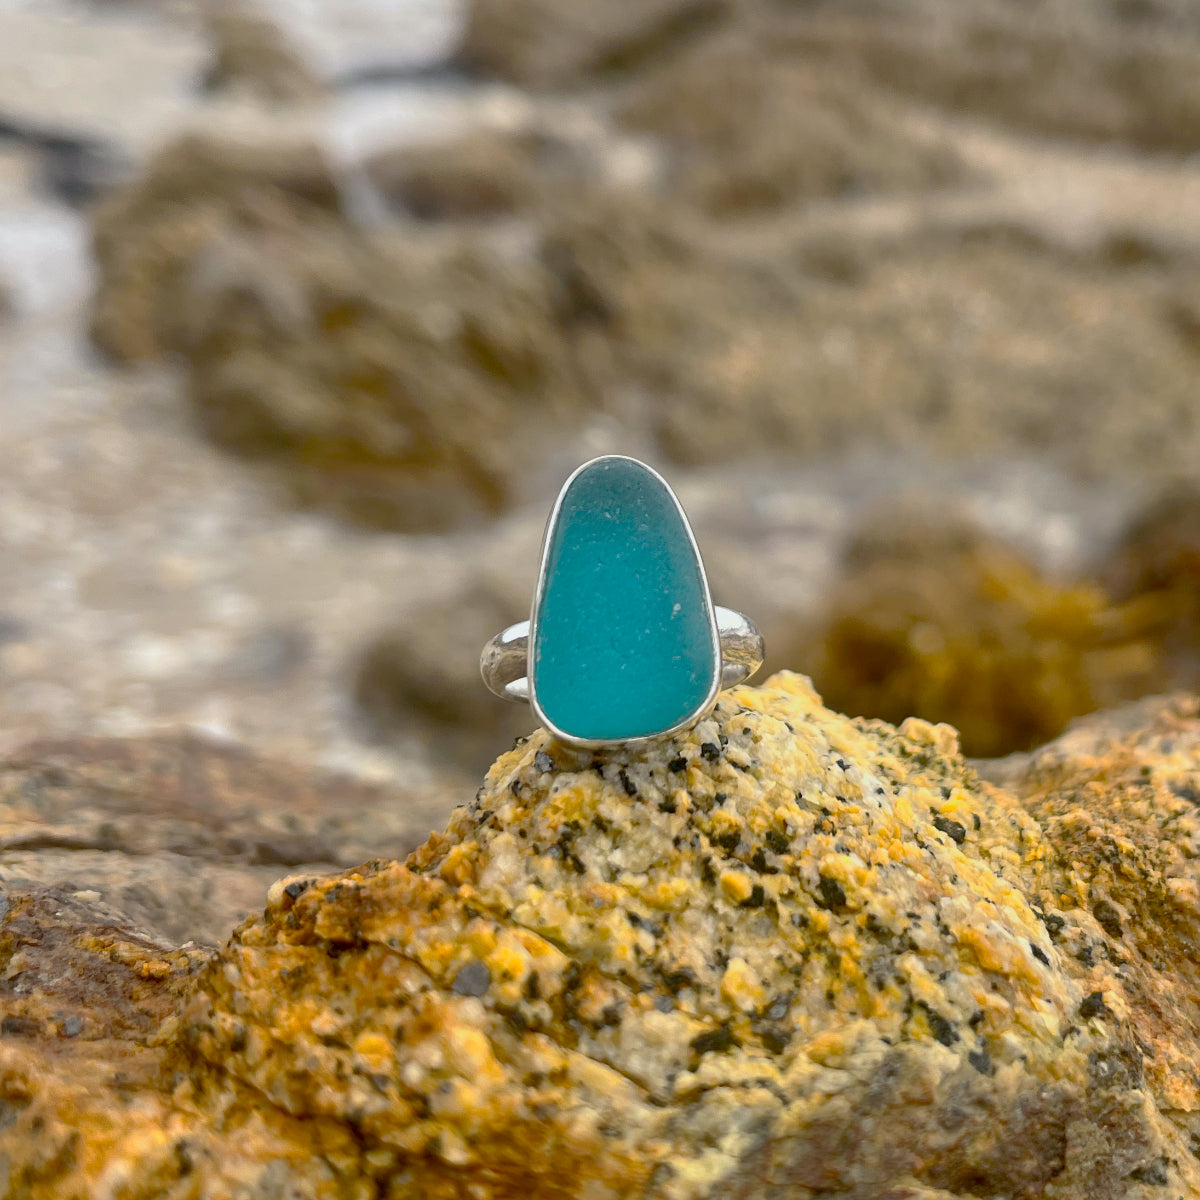 Ocean Teal sea glass ring Size 7 by Mornington Sea Glass